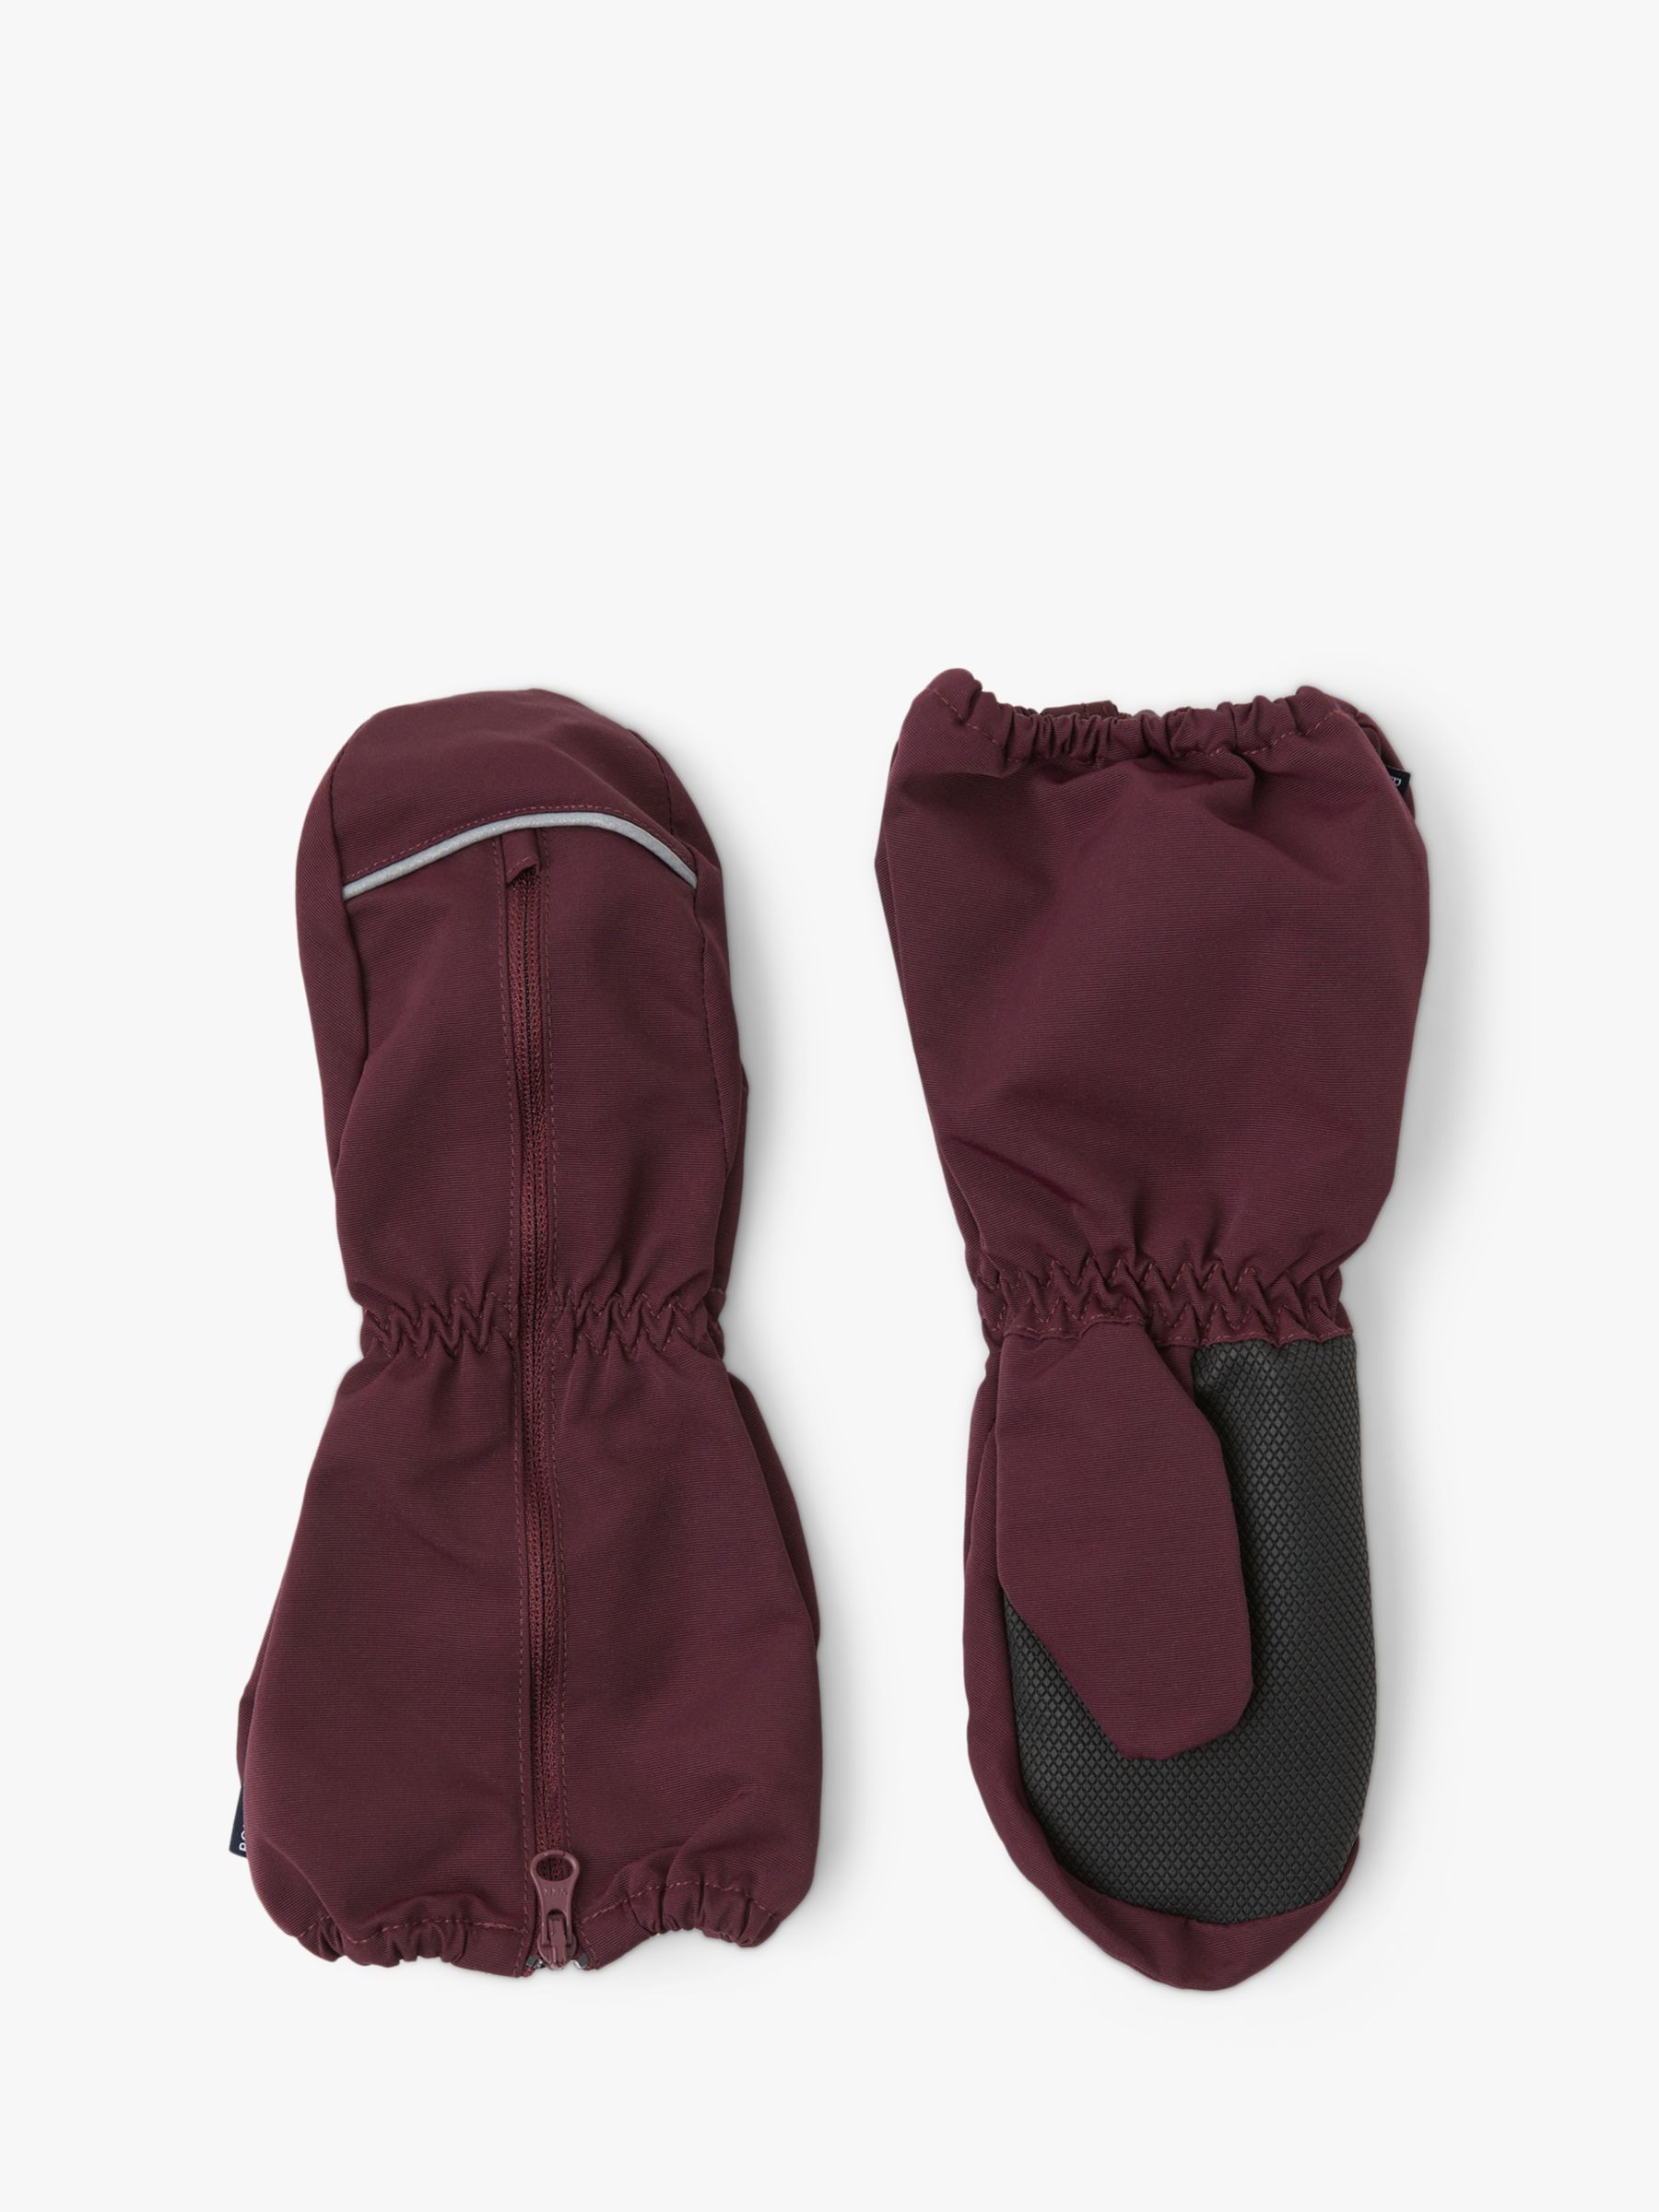 Buy Polarn O. Pyret Kids' Shell Mittens, Red Online at johnlewis.com